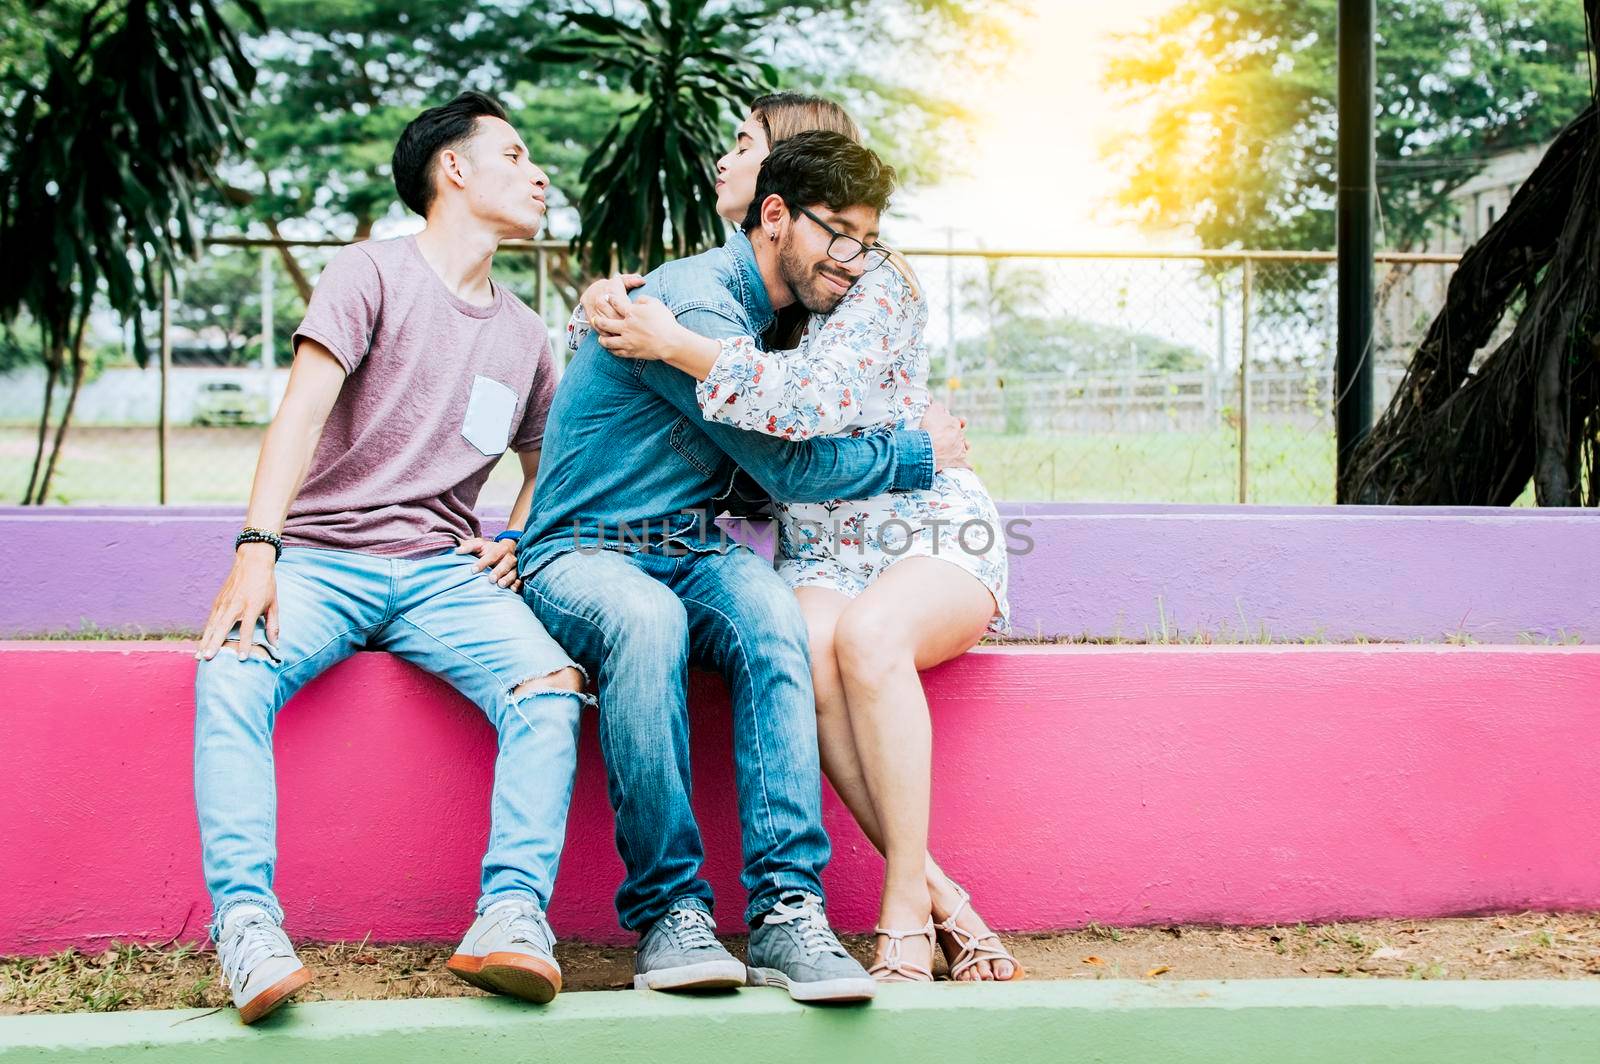 Unfaithful girl sitting hugging her boyfriend and secretly kissing another man. Unfaithful girlfriend hugging her boyfriend in a park secretly kissing another man, Couple infidelity concept